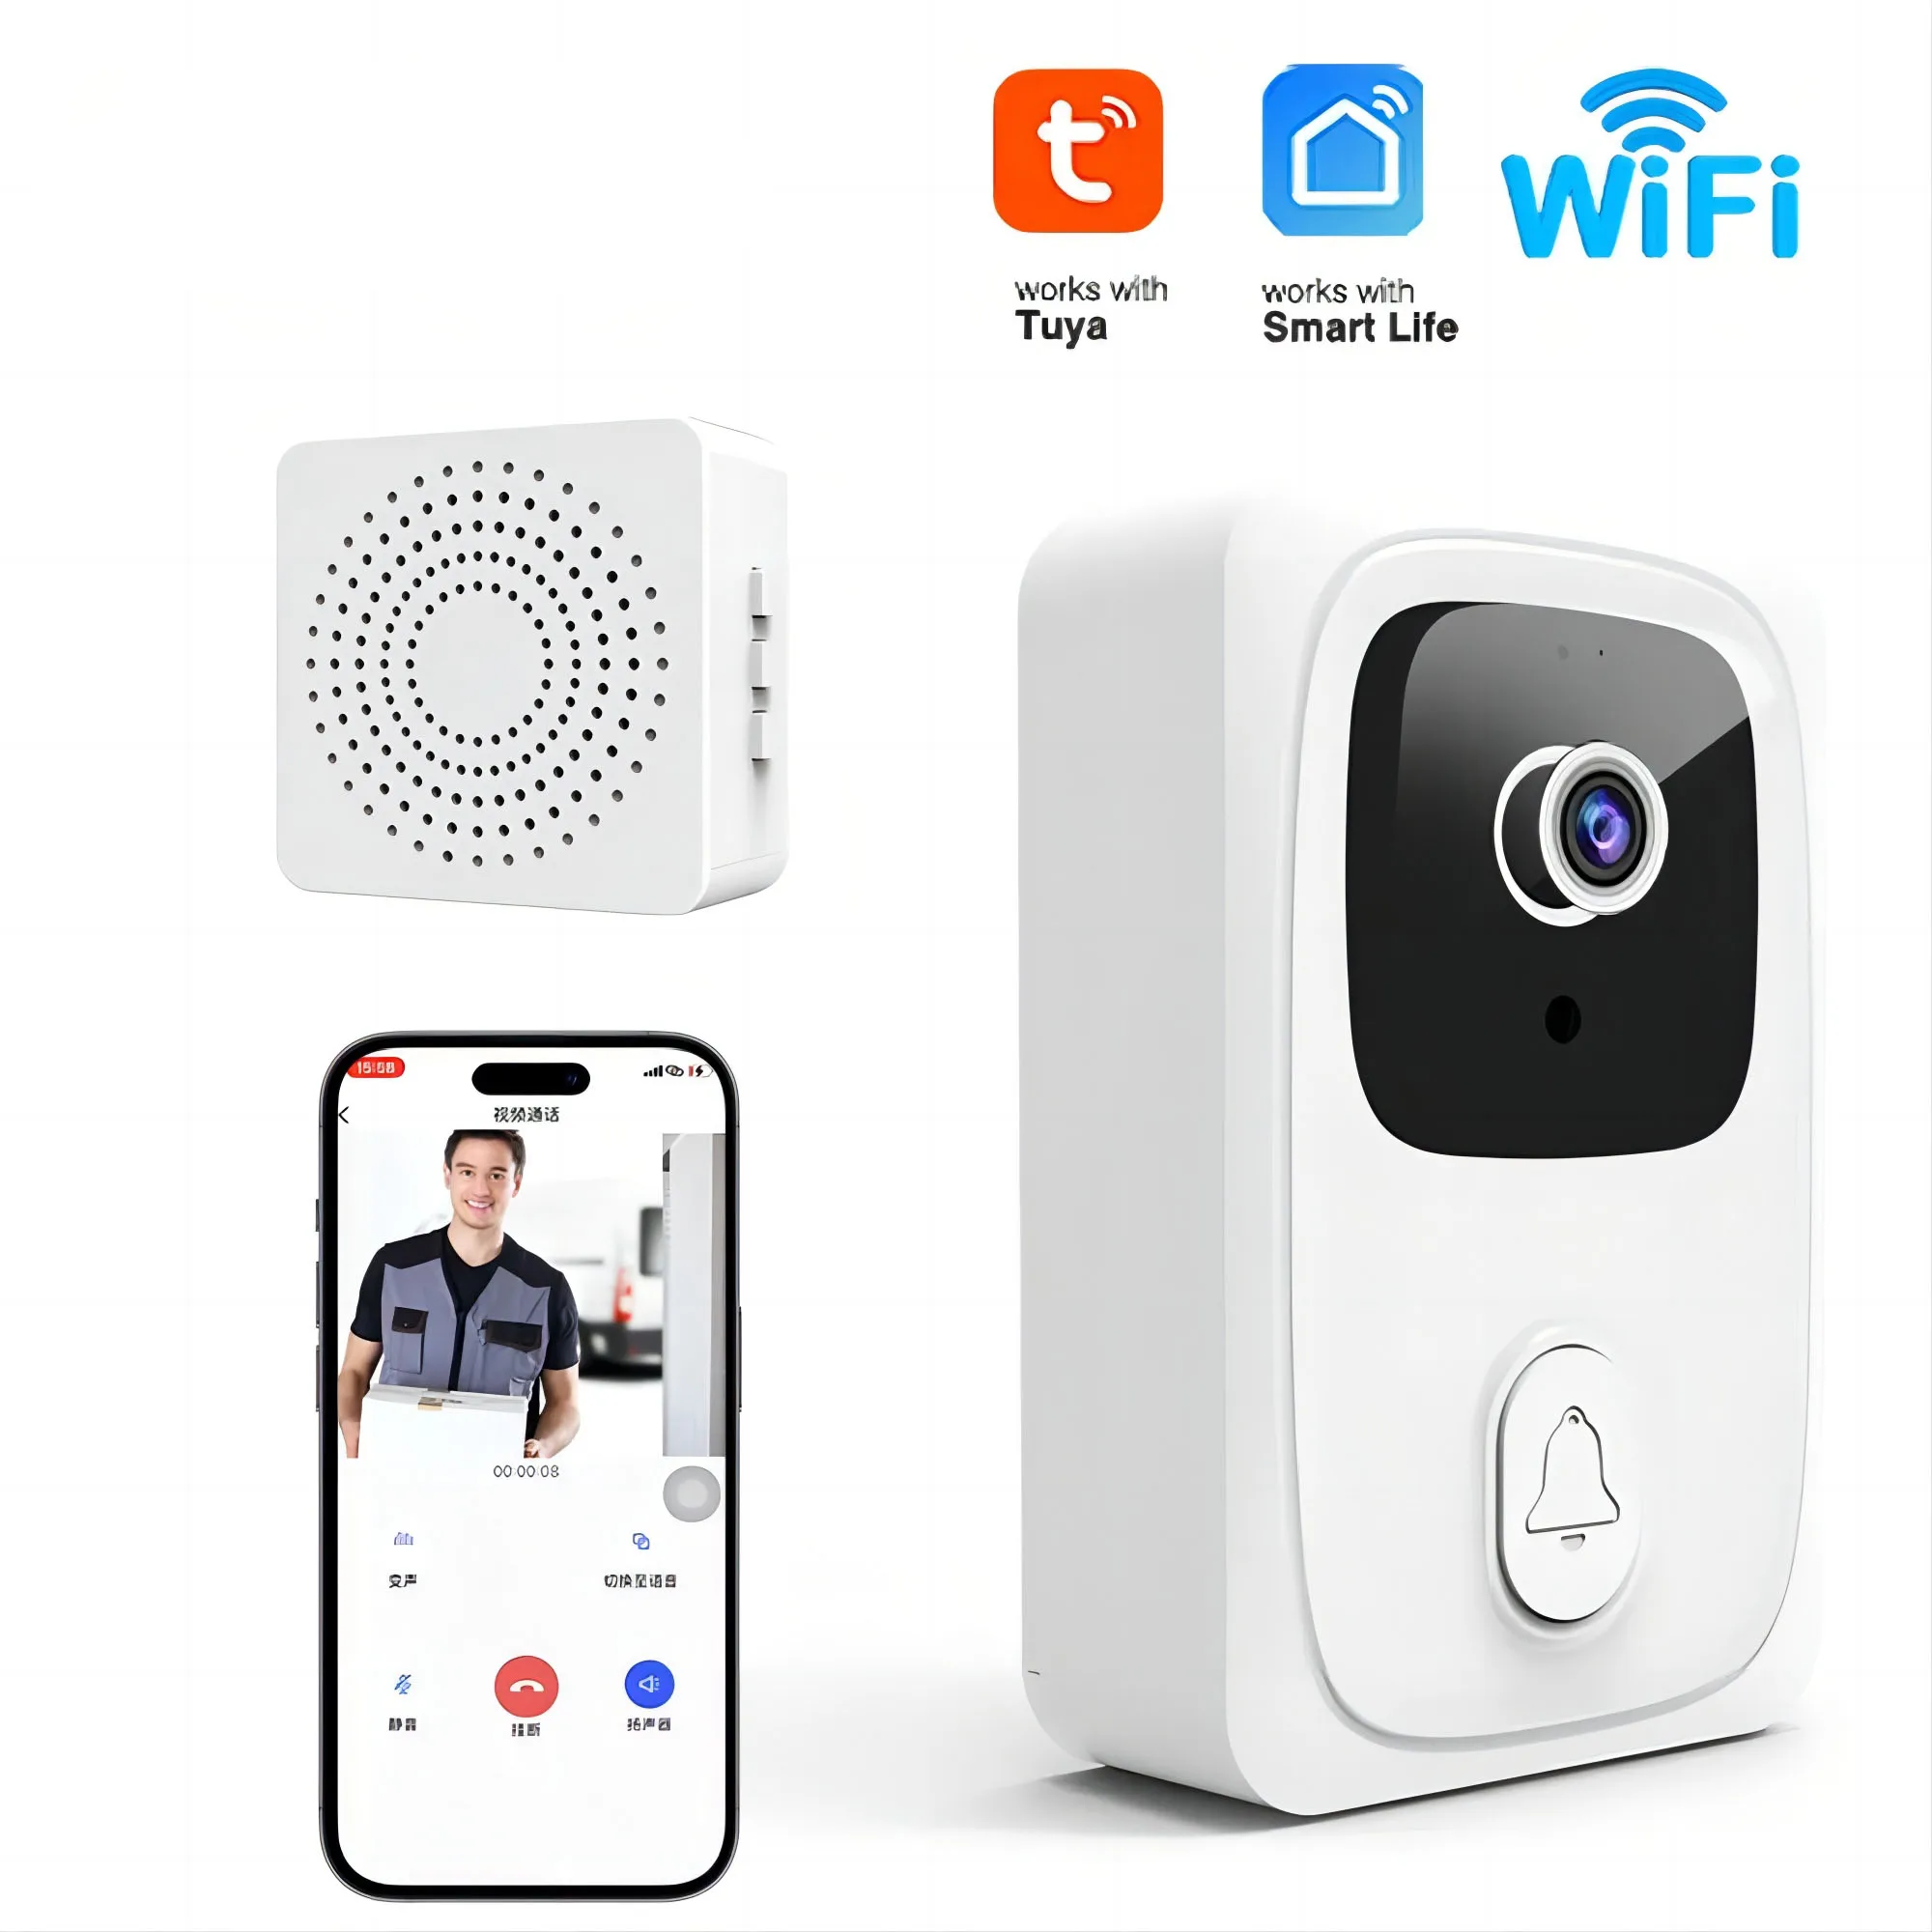 Tuya Video Doorbell Wireless WiFi Door Bell Camera Smart Home Security Night Vision Motion Detection Visual Intercom with Chime wireless wifi doorbell camera waterproof 720p hd video door bell smart outdoor wireless doorbell with camera night vision